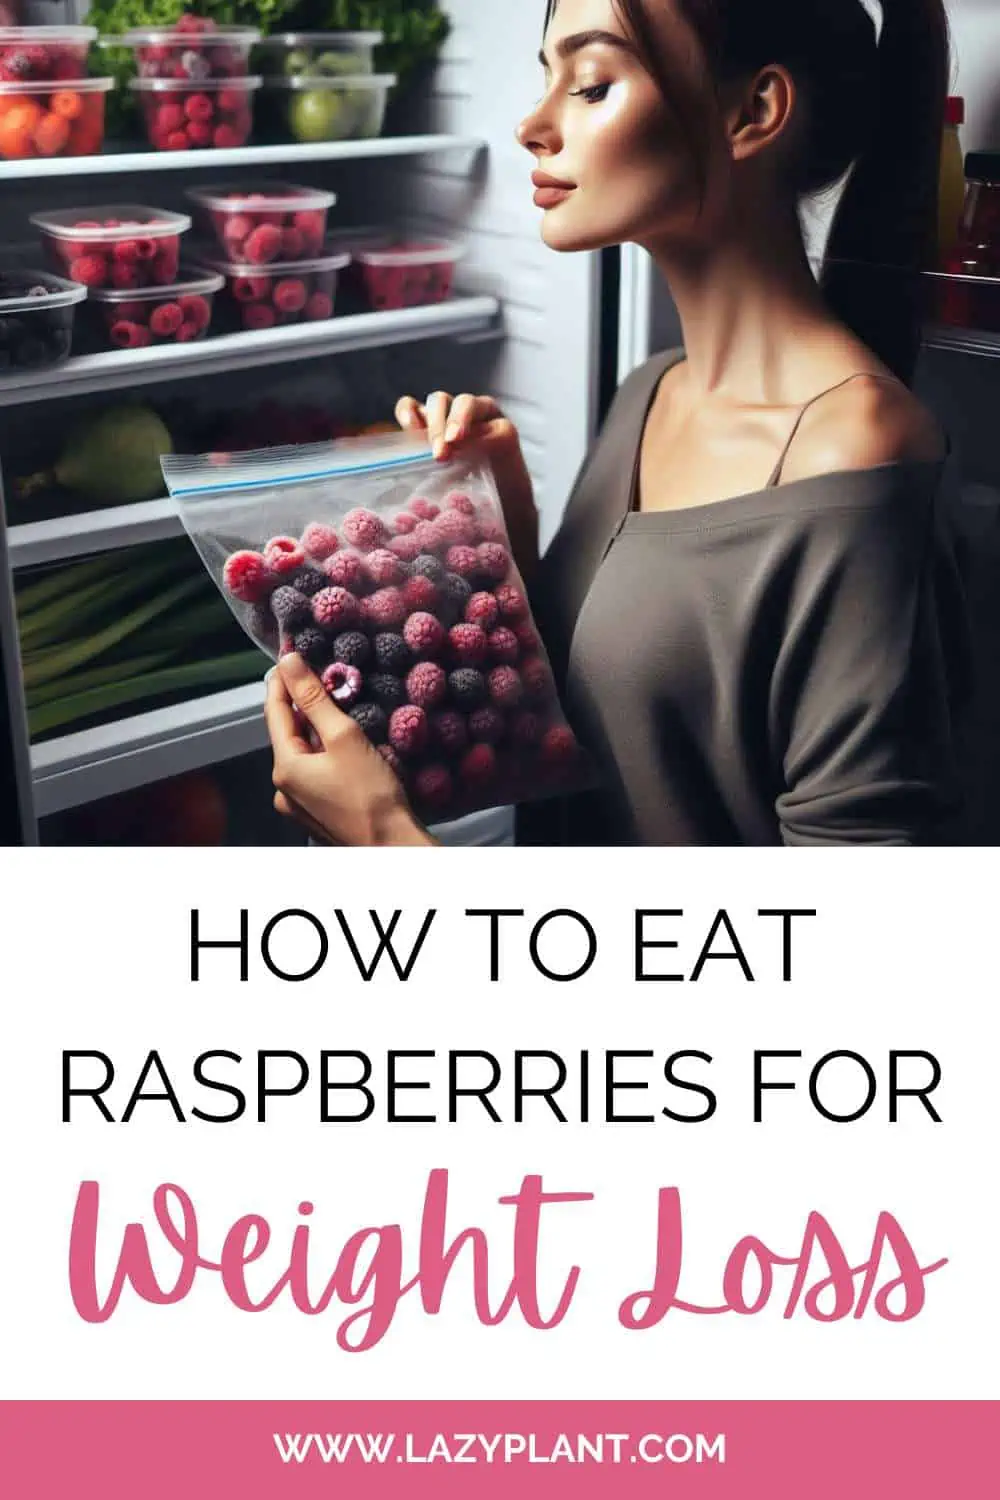 How to eat raspberries for weight loss?